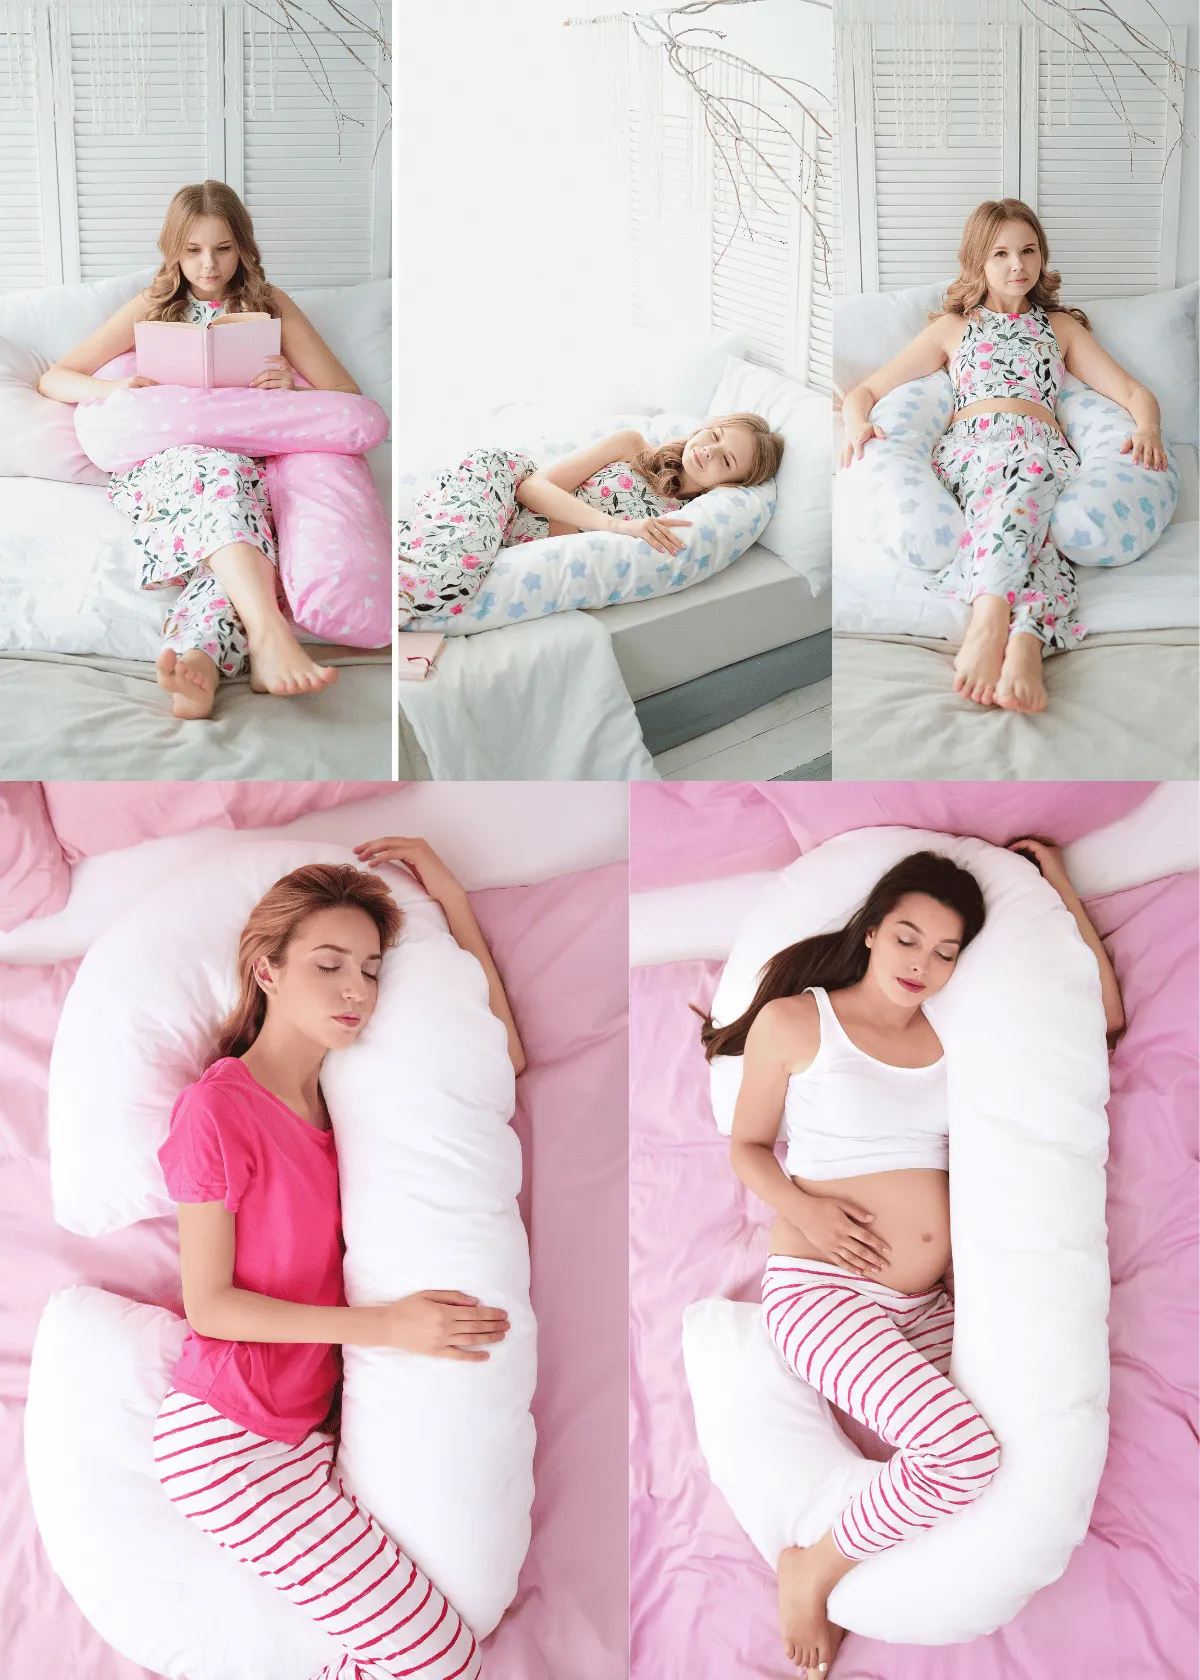 Samples of People Using Their Body Pillows (Credit: Canva)